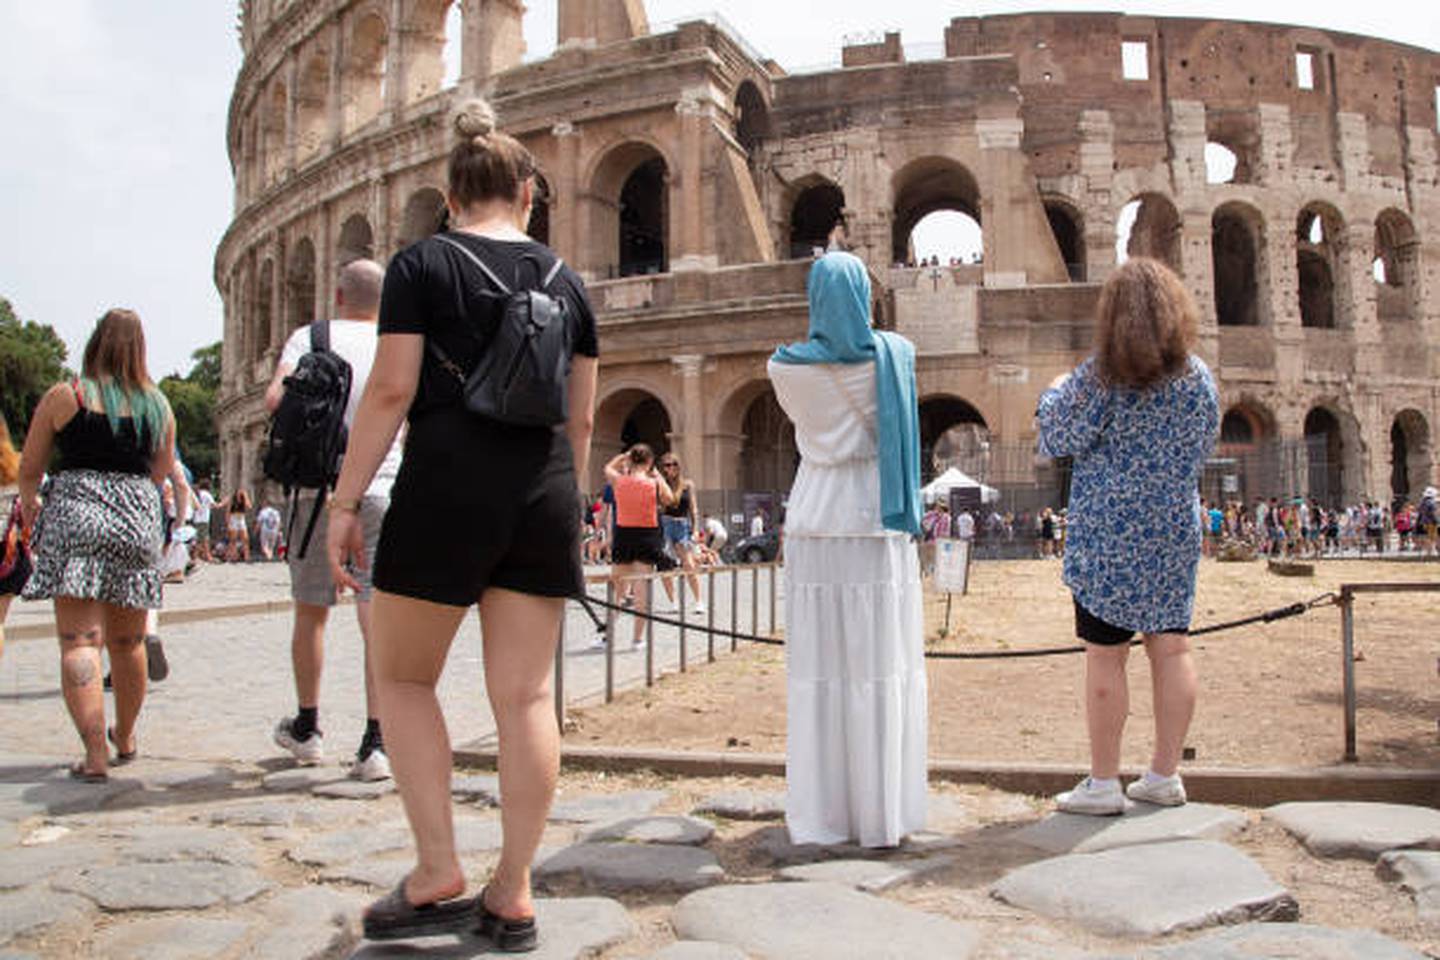 The revival in tourism was partly credited to good weather, with visitors seen here at the Colosseum in Rome. Getty 